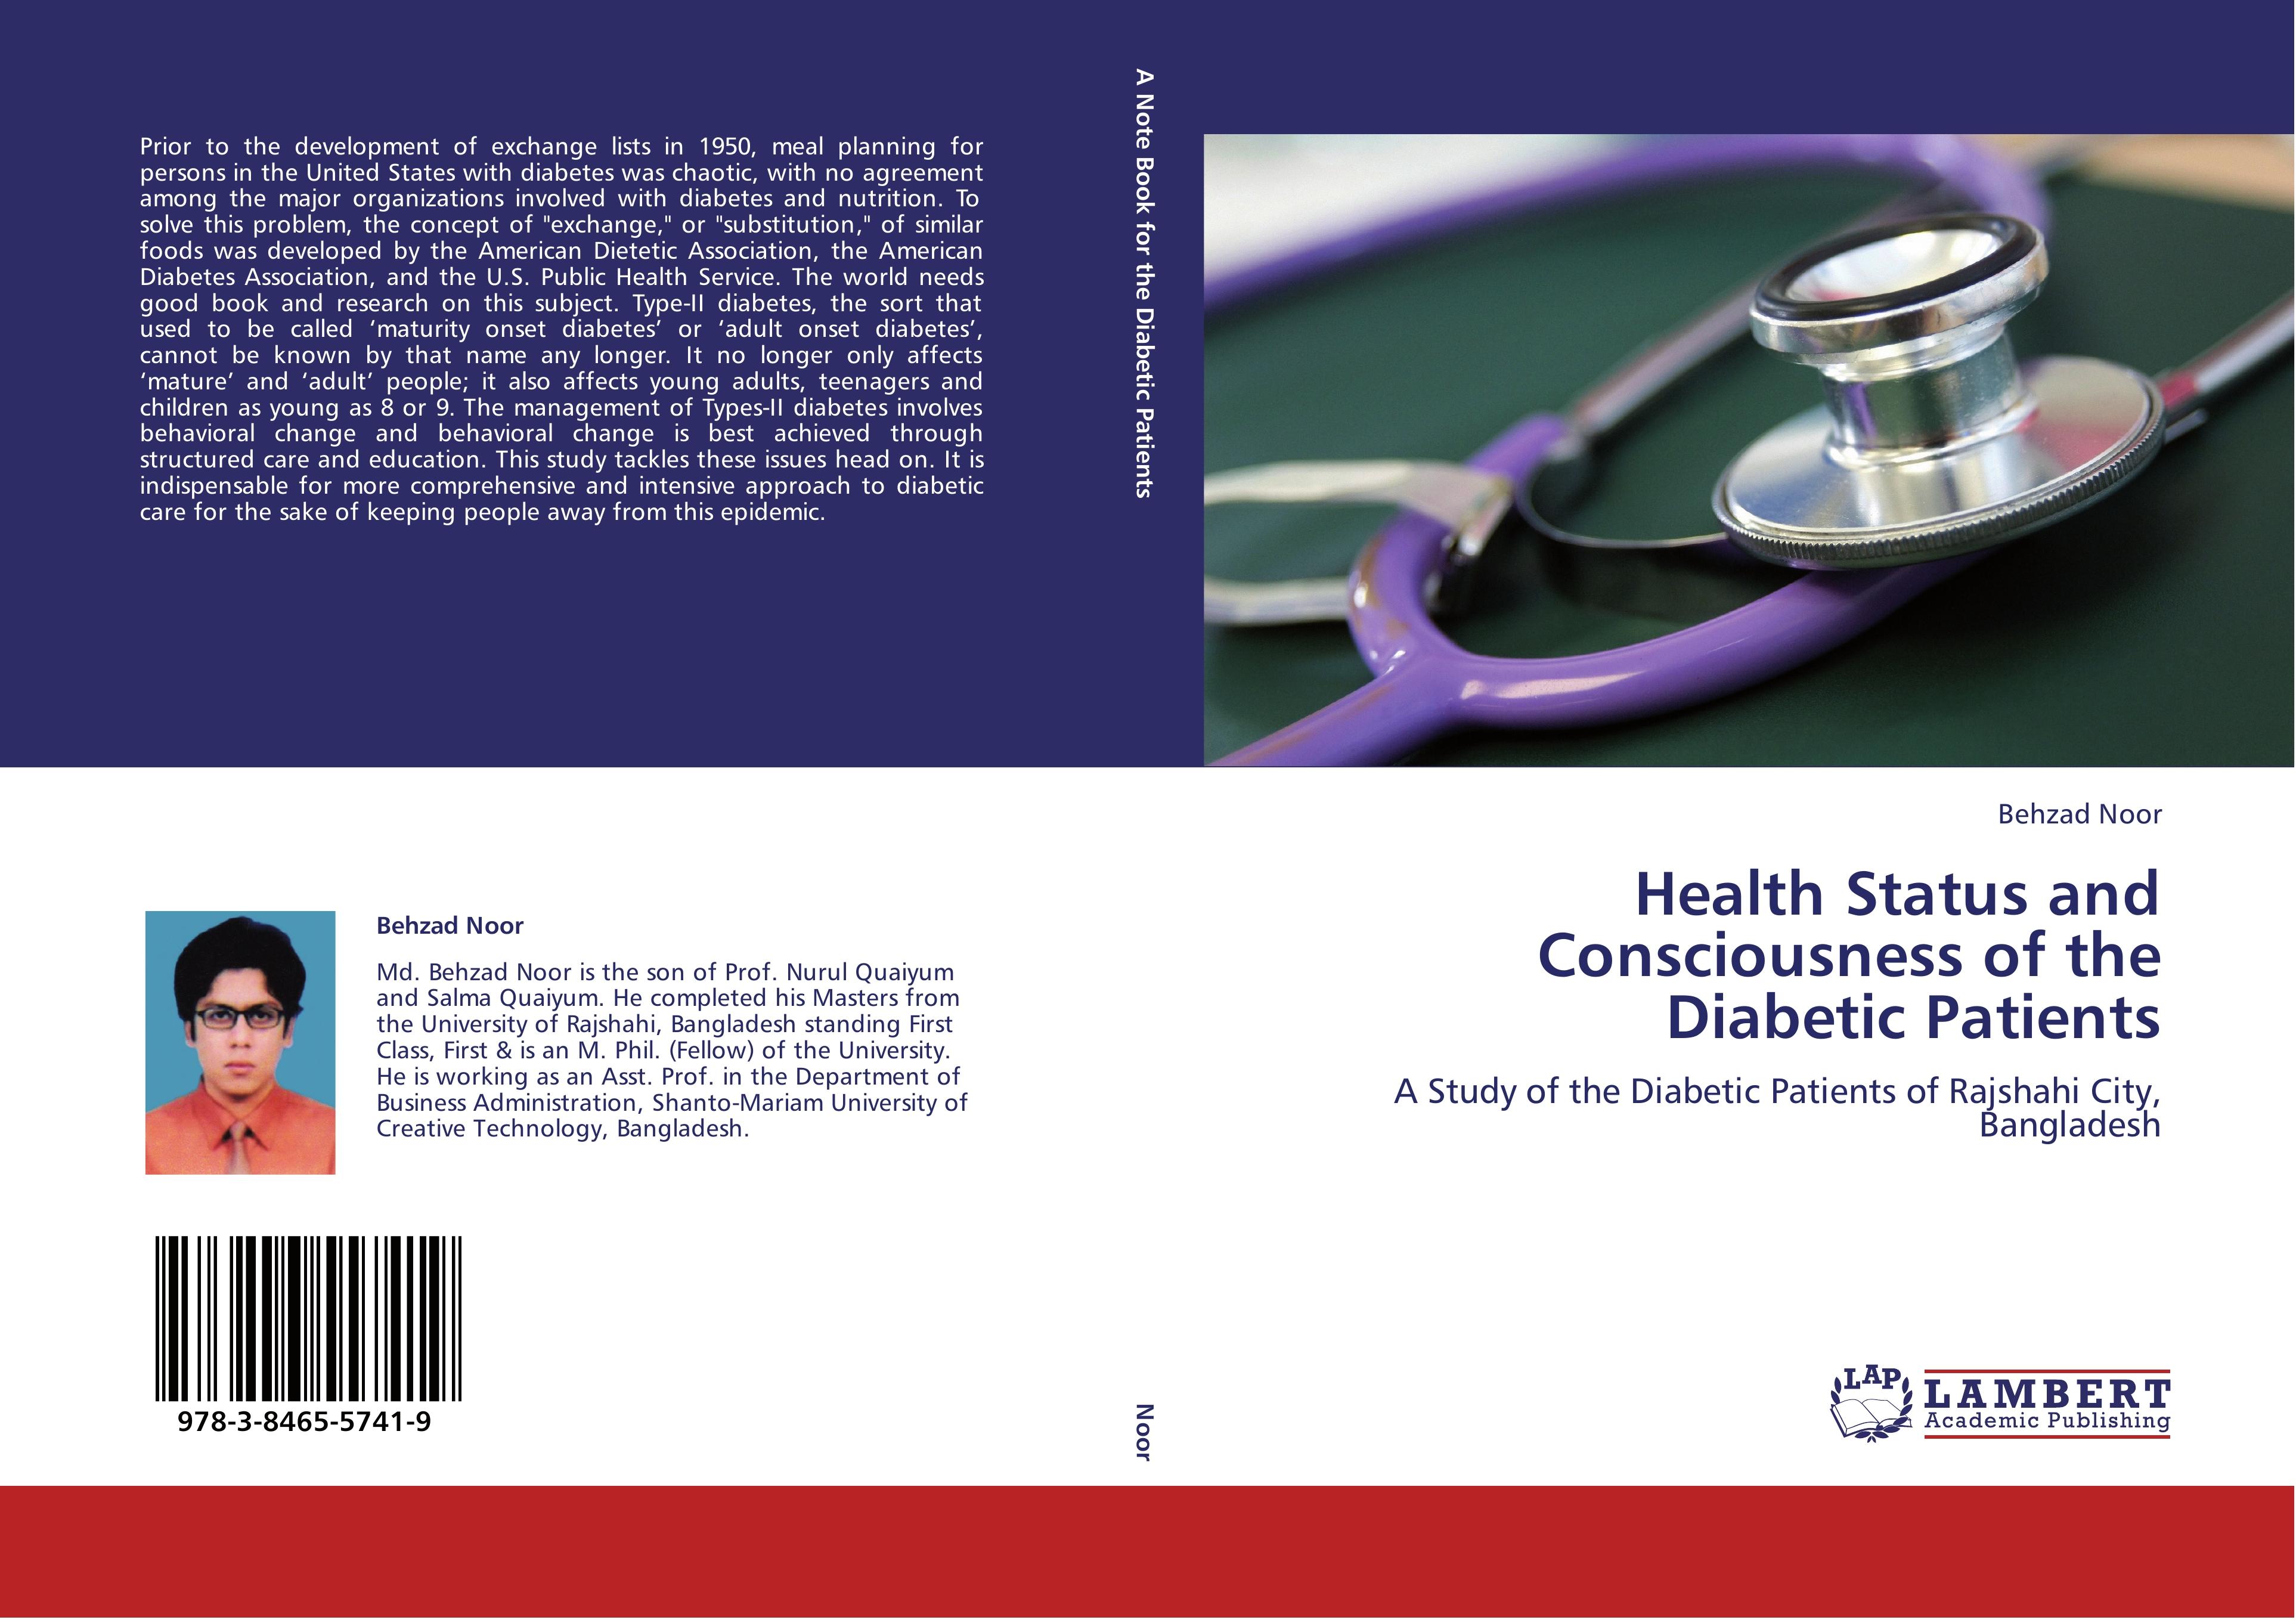 Health Status and Consciousness of the Diabetic Patients - Behzad Noor